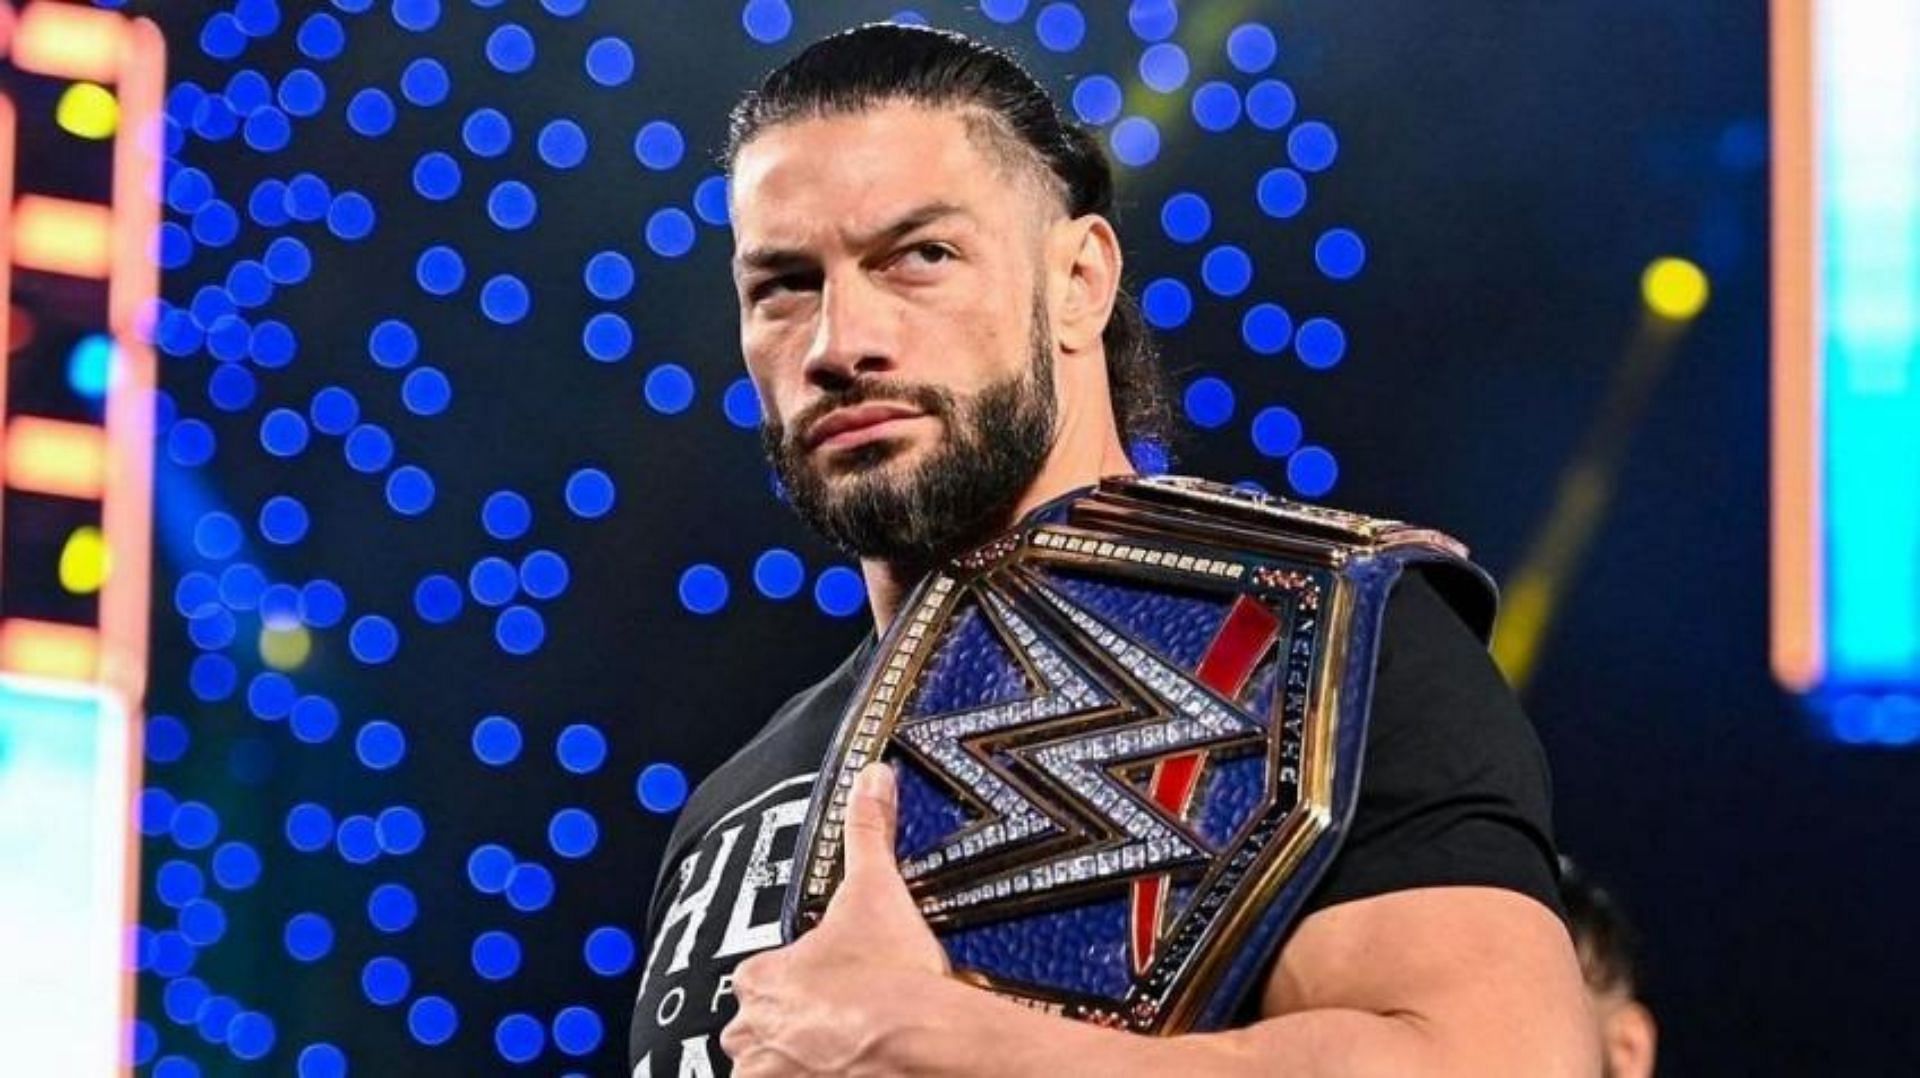 Roman Reigns will defend his Universal Title against Brock Lesnar